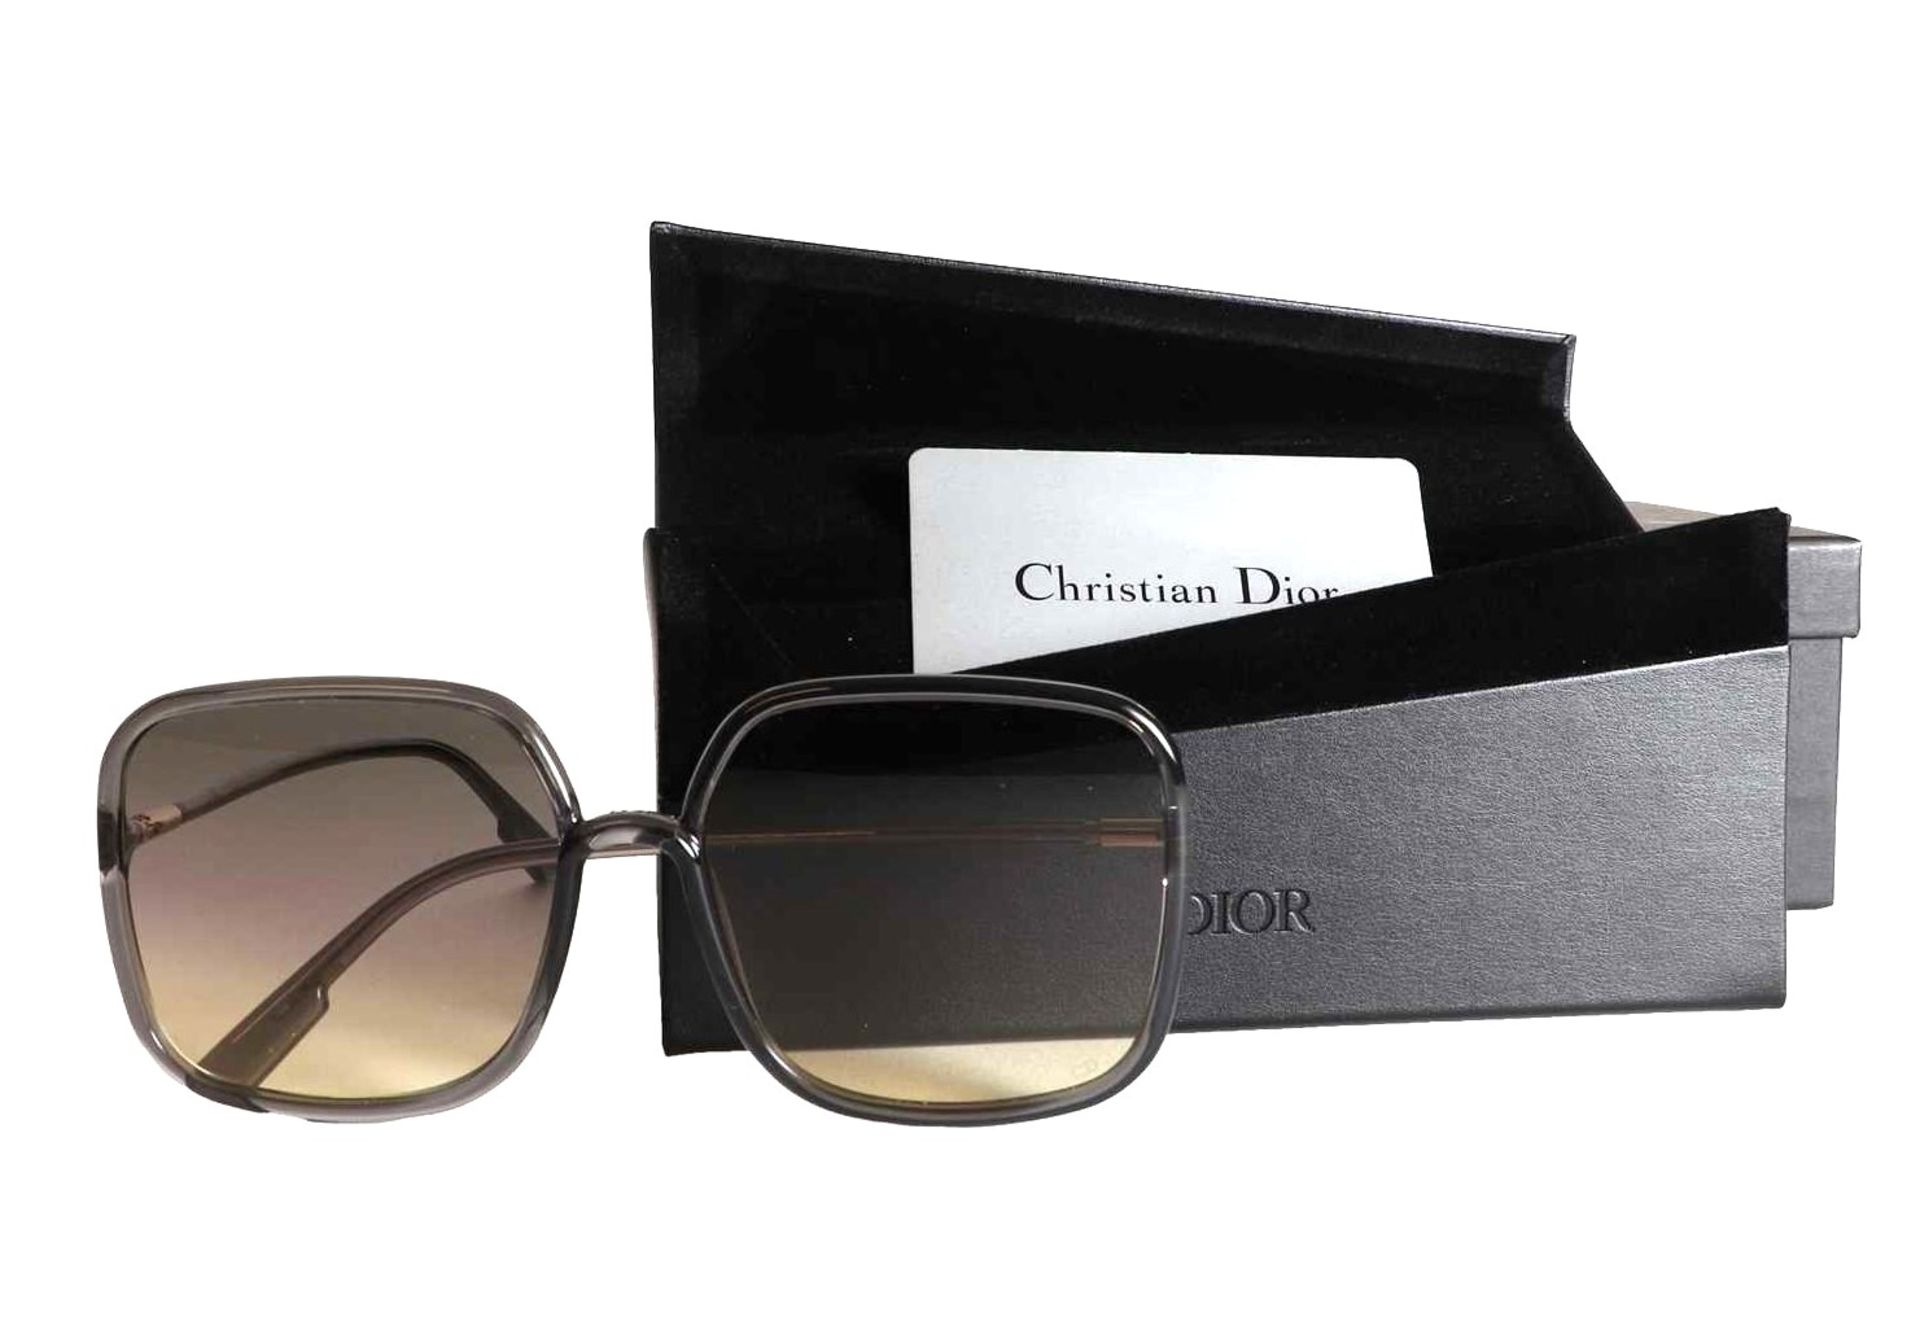 Christian Dior SoStellaire 1 Sunglasses New With Case - Image 11 of 11